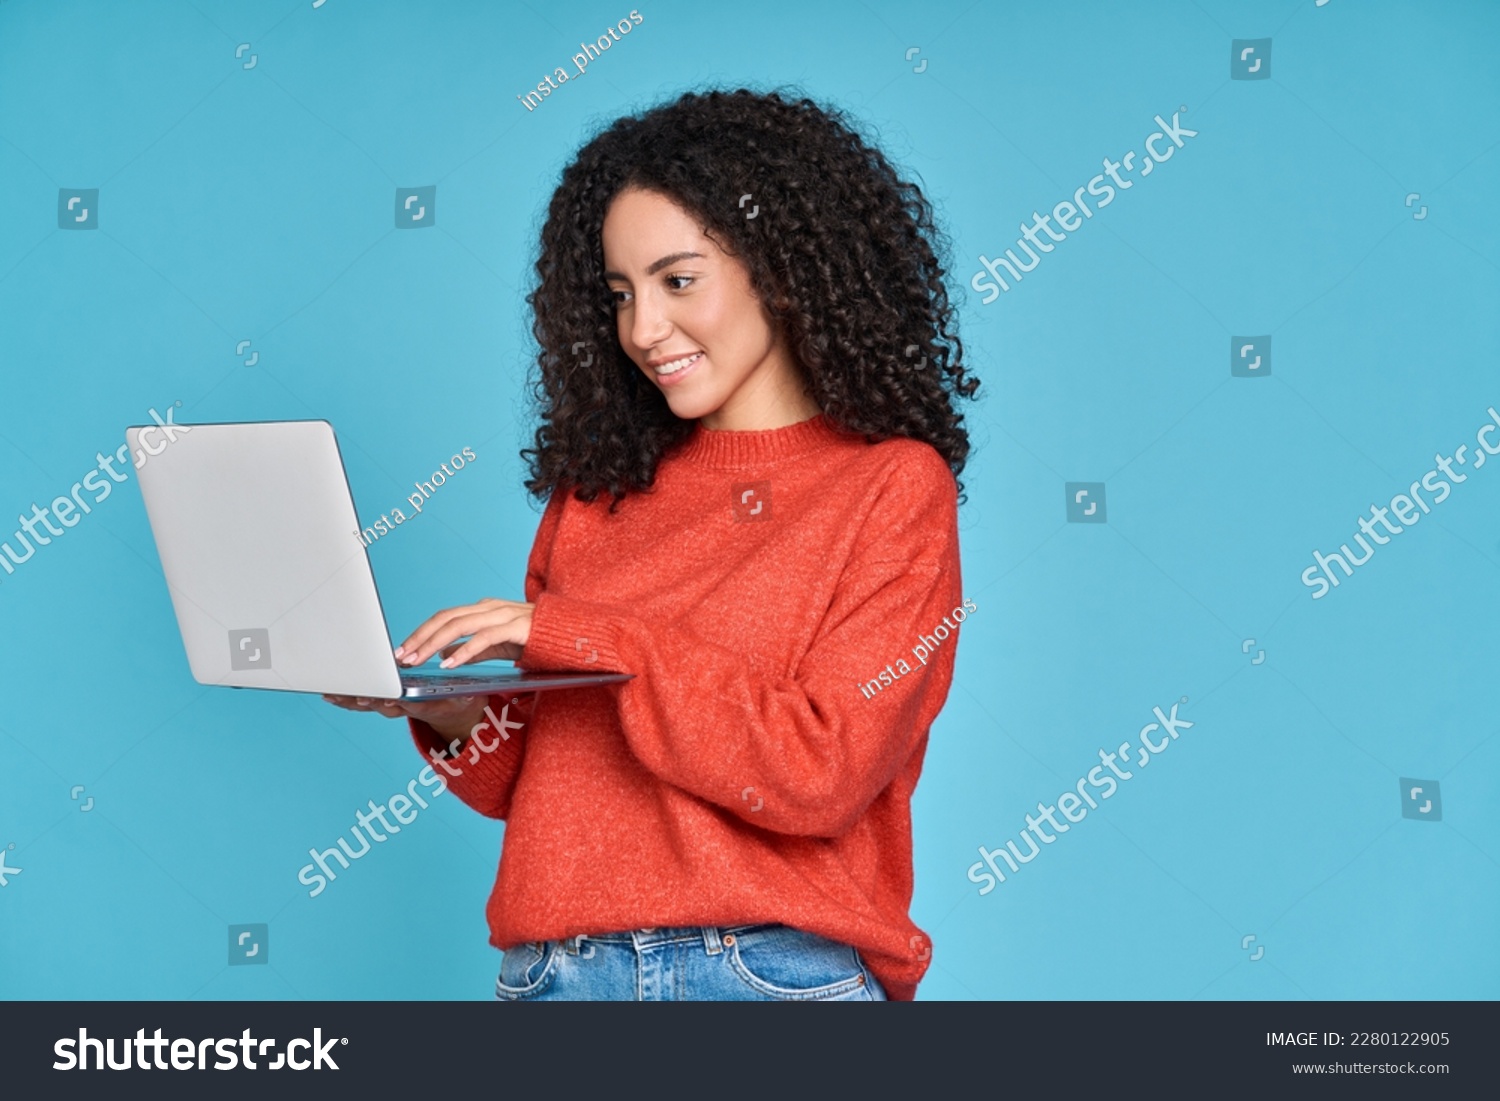 Young latin woman student using laptop device standing isolated on blue background. Smiling female model user holding computer, typing, surfing, searching job online or shopping website. #2280122905